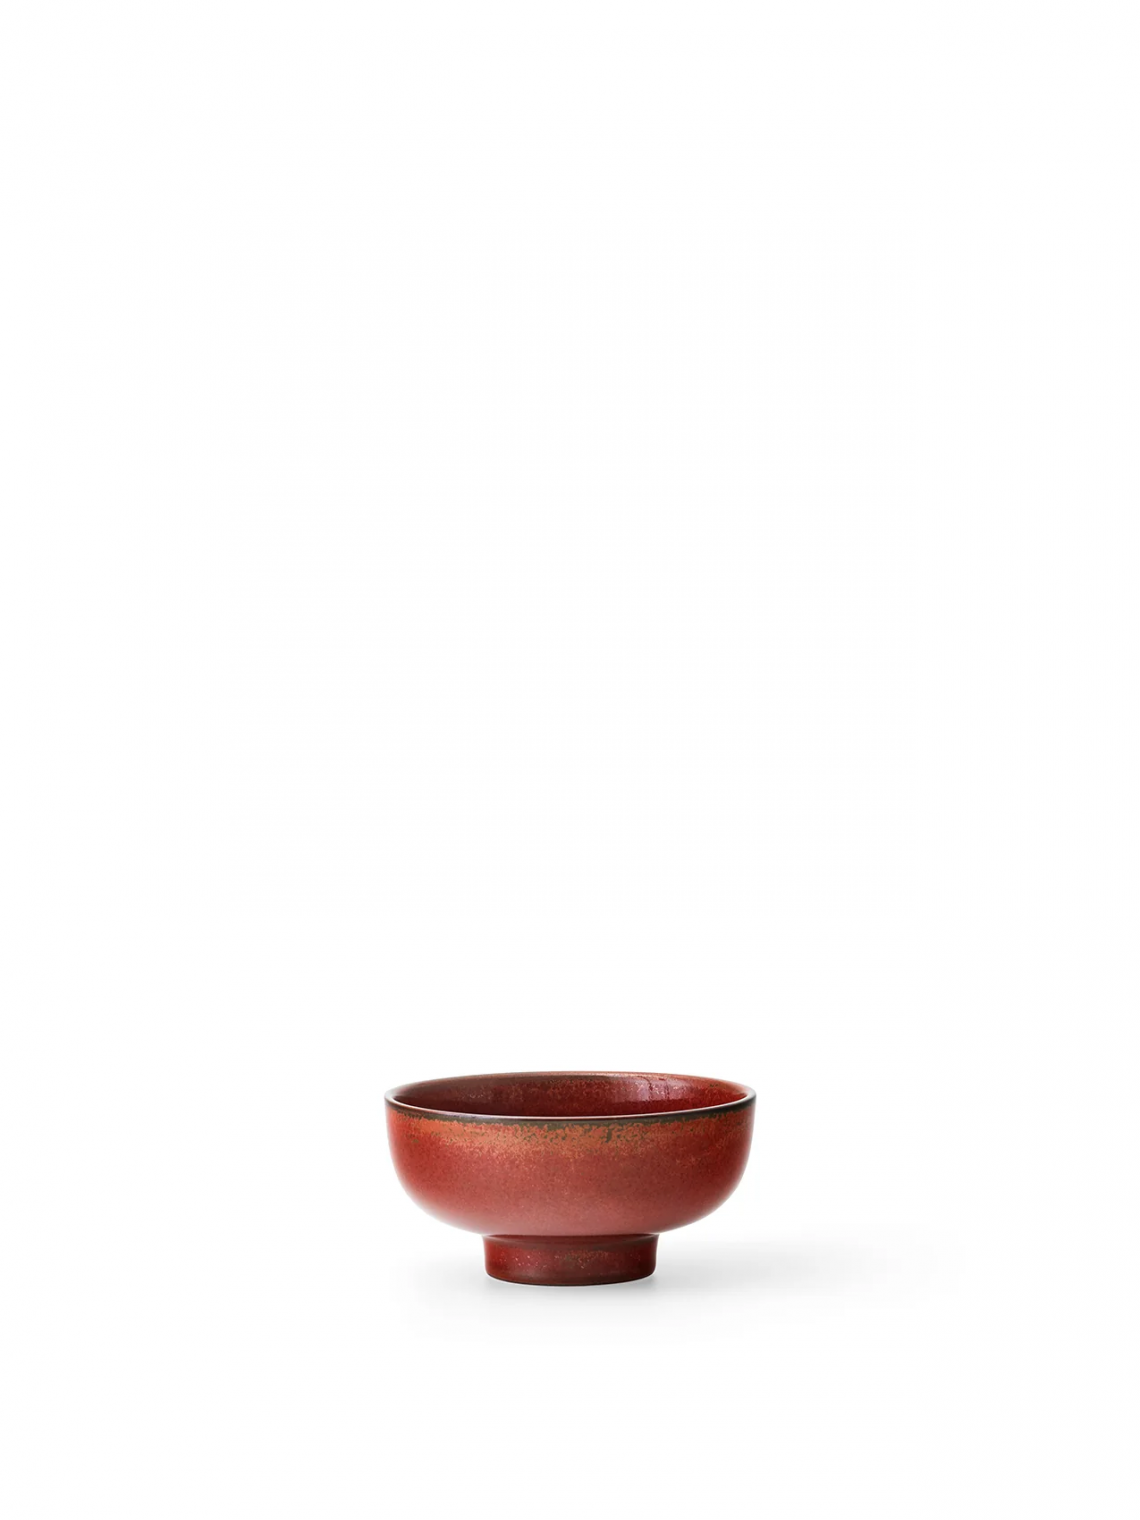 New Norm Footed Bowl碗场景图2